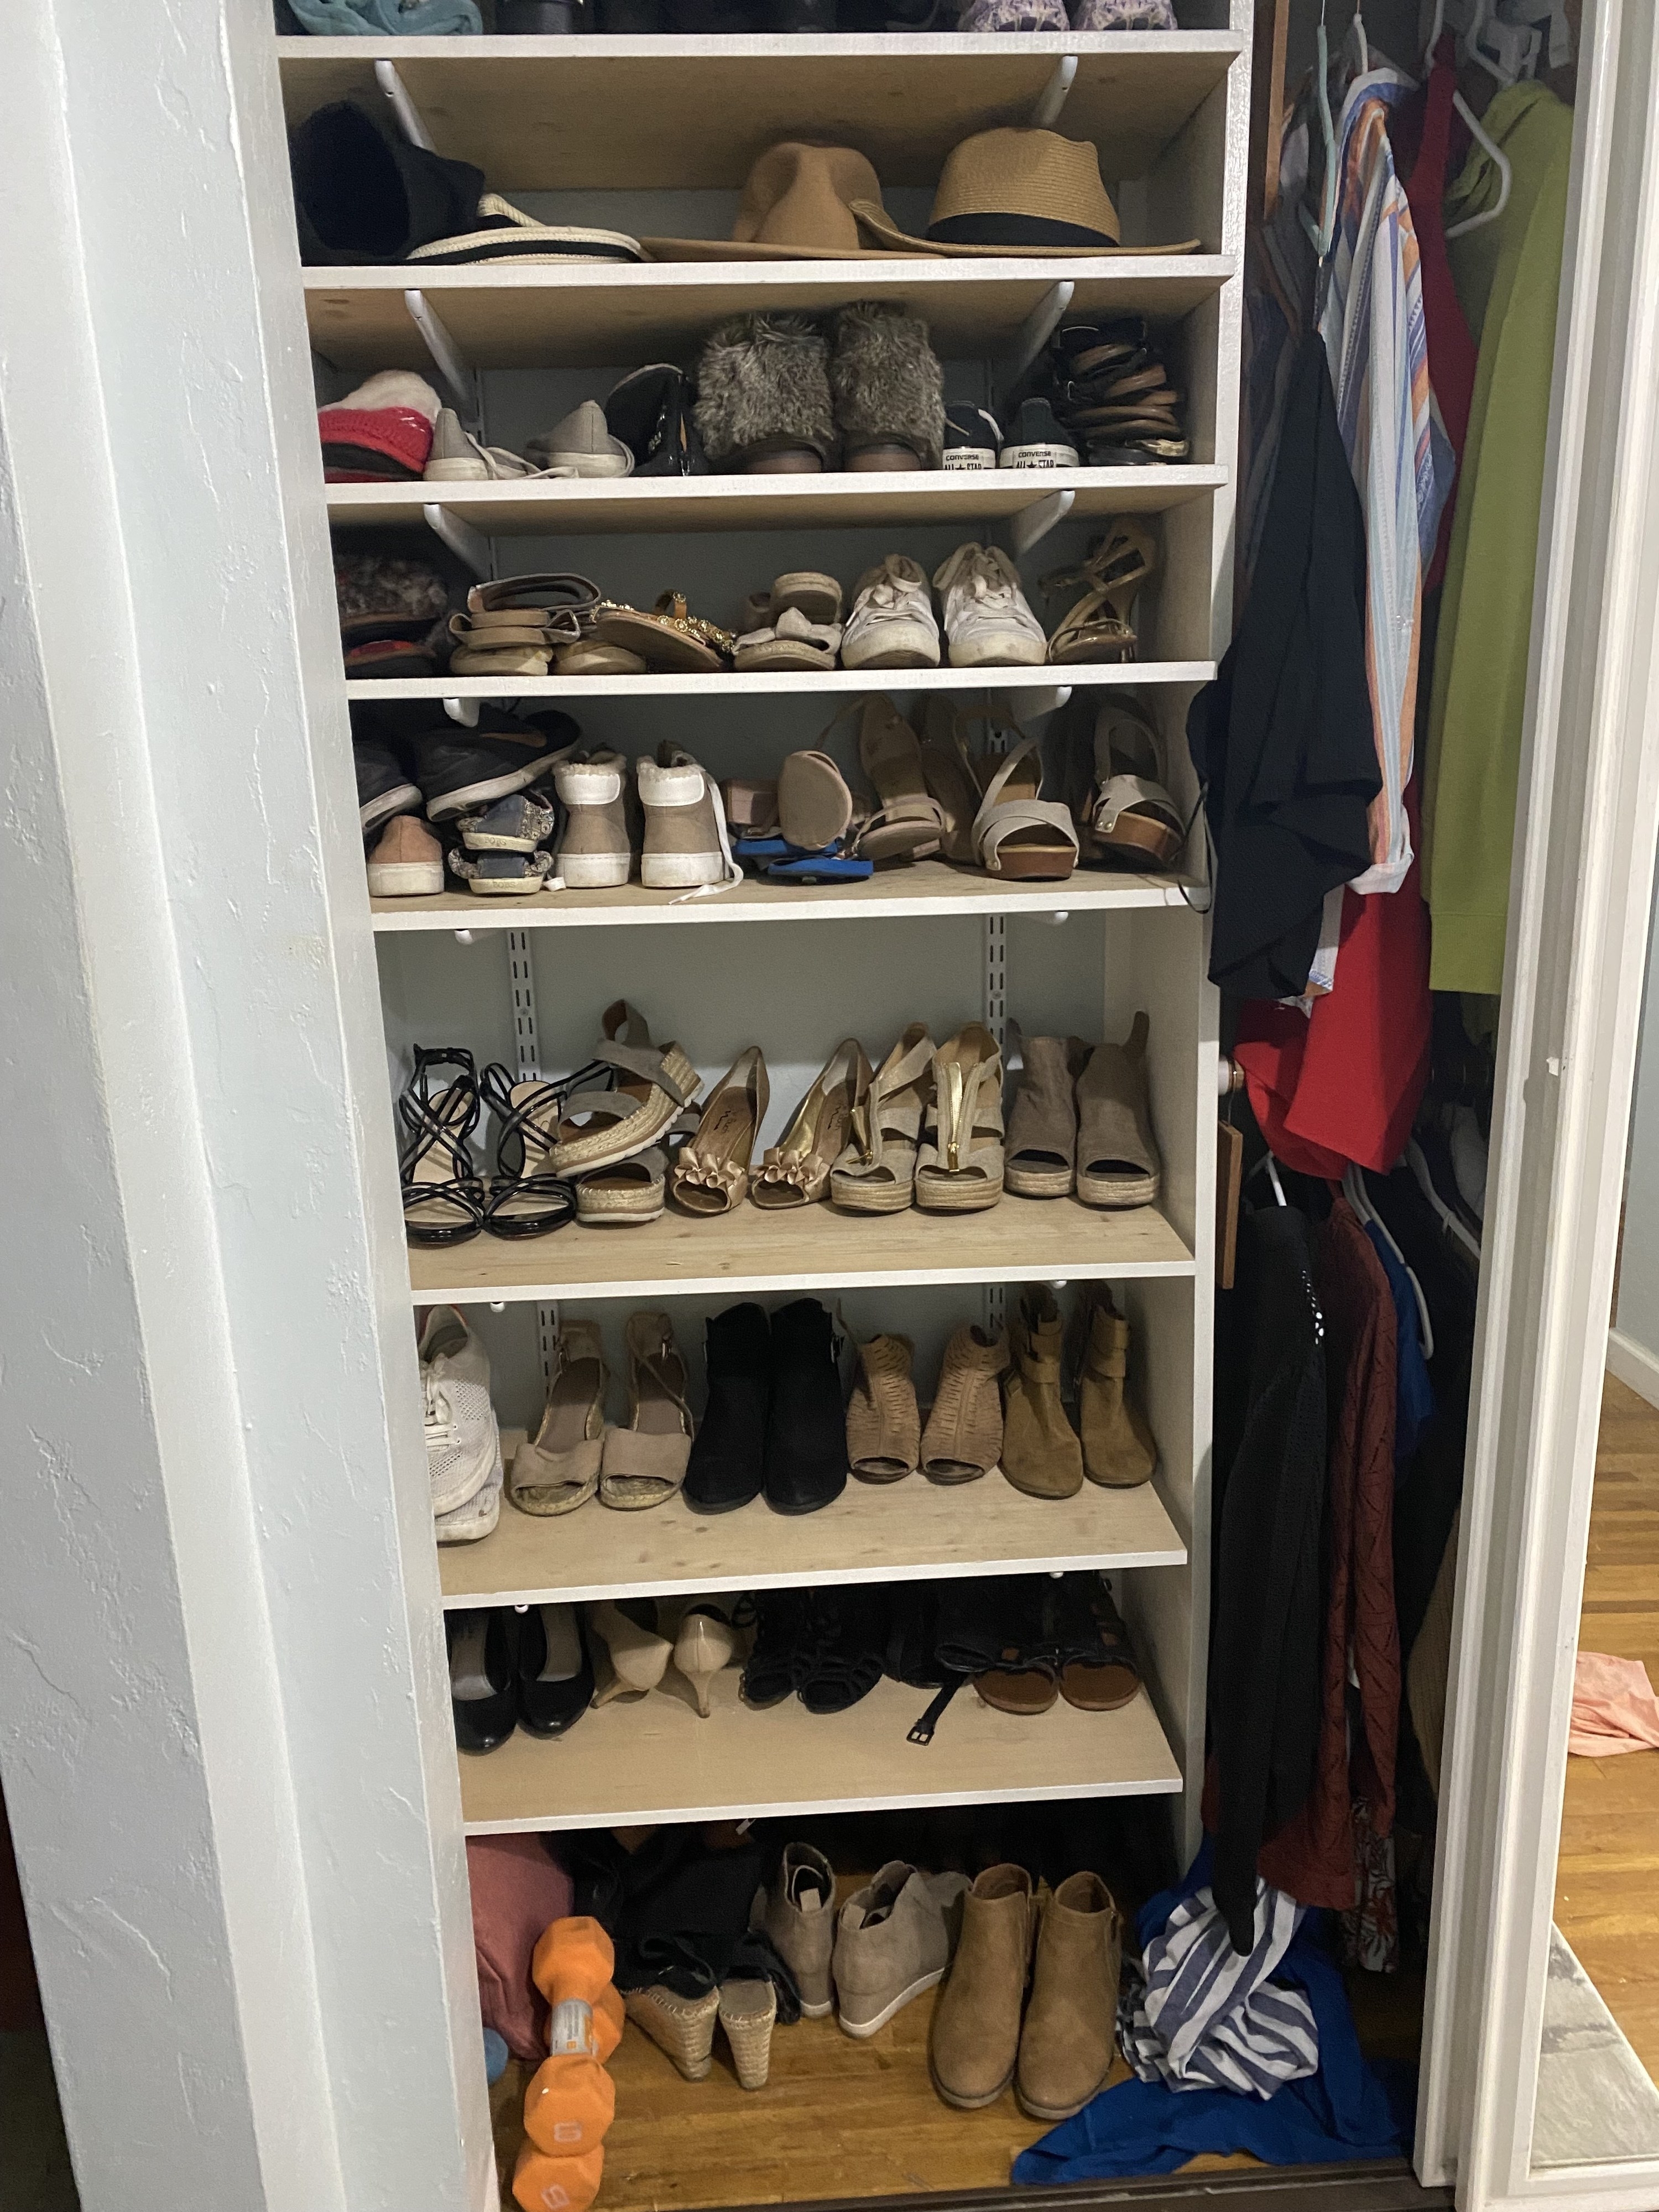 Closet with rows of shoes